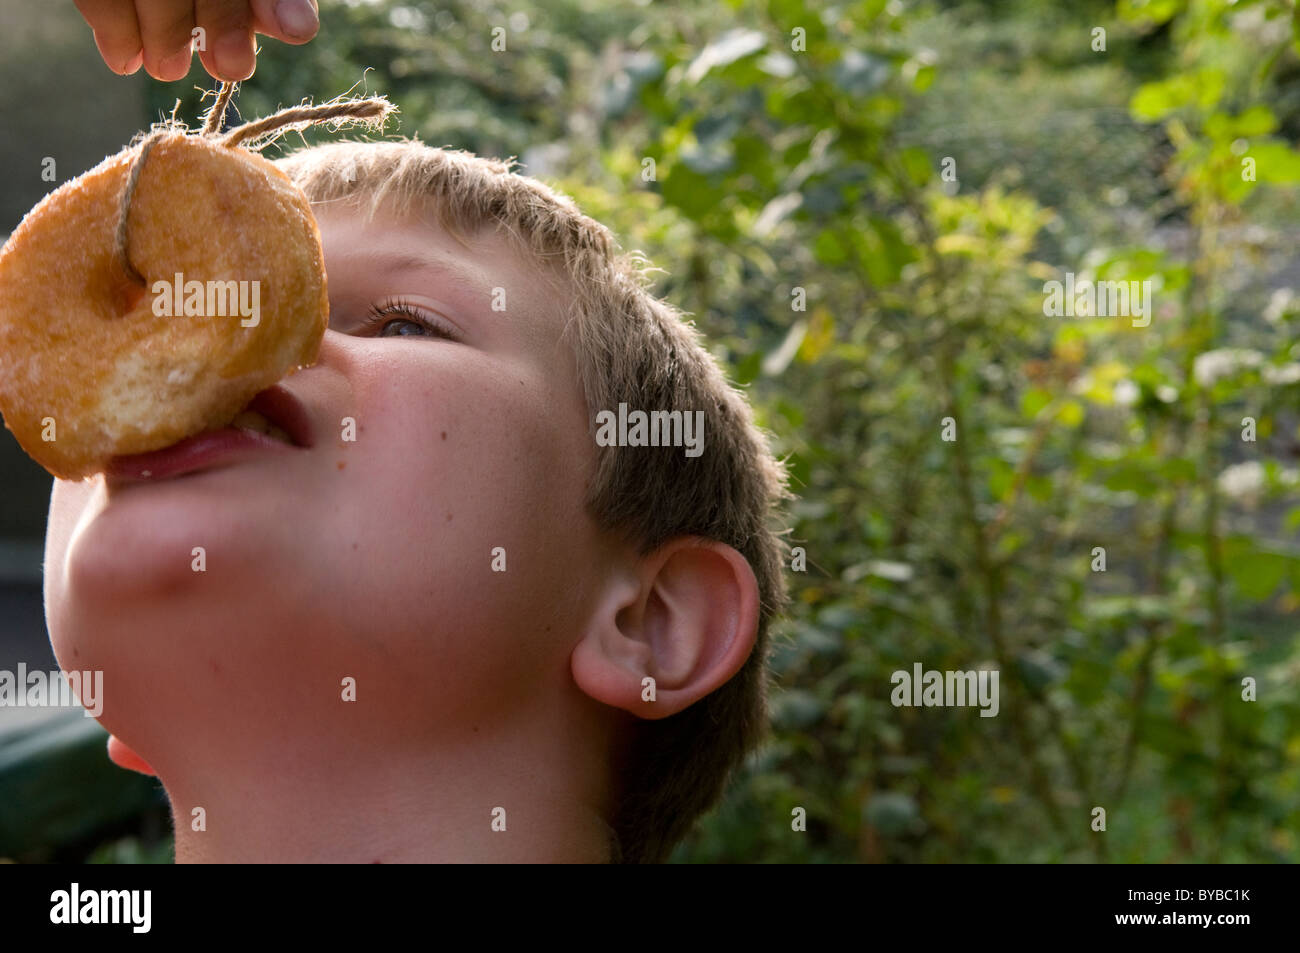 Child eating a doughnut off a string Stock Photo - Alamy